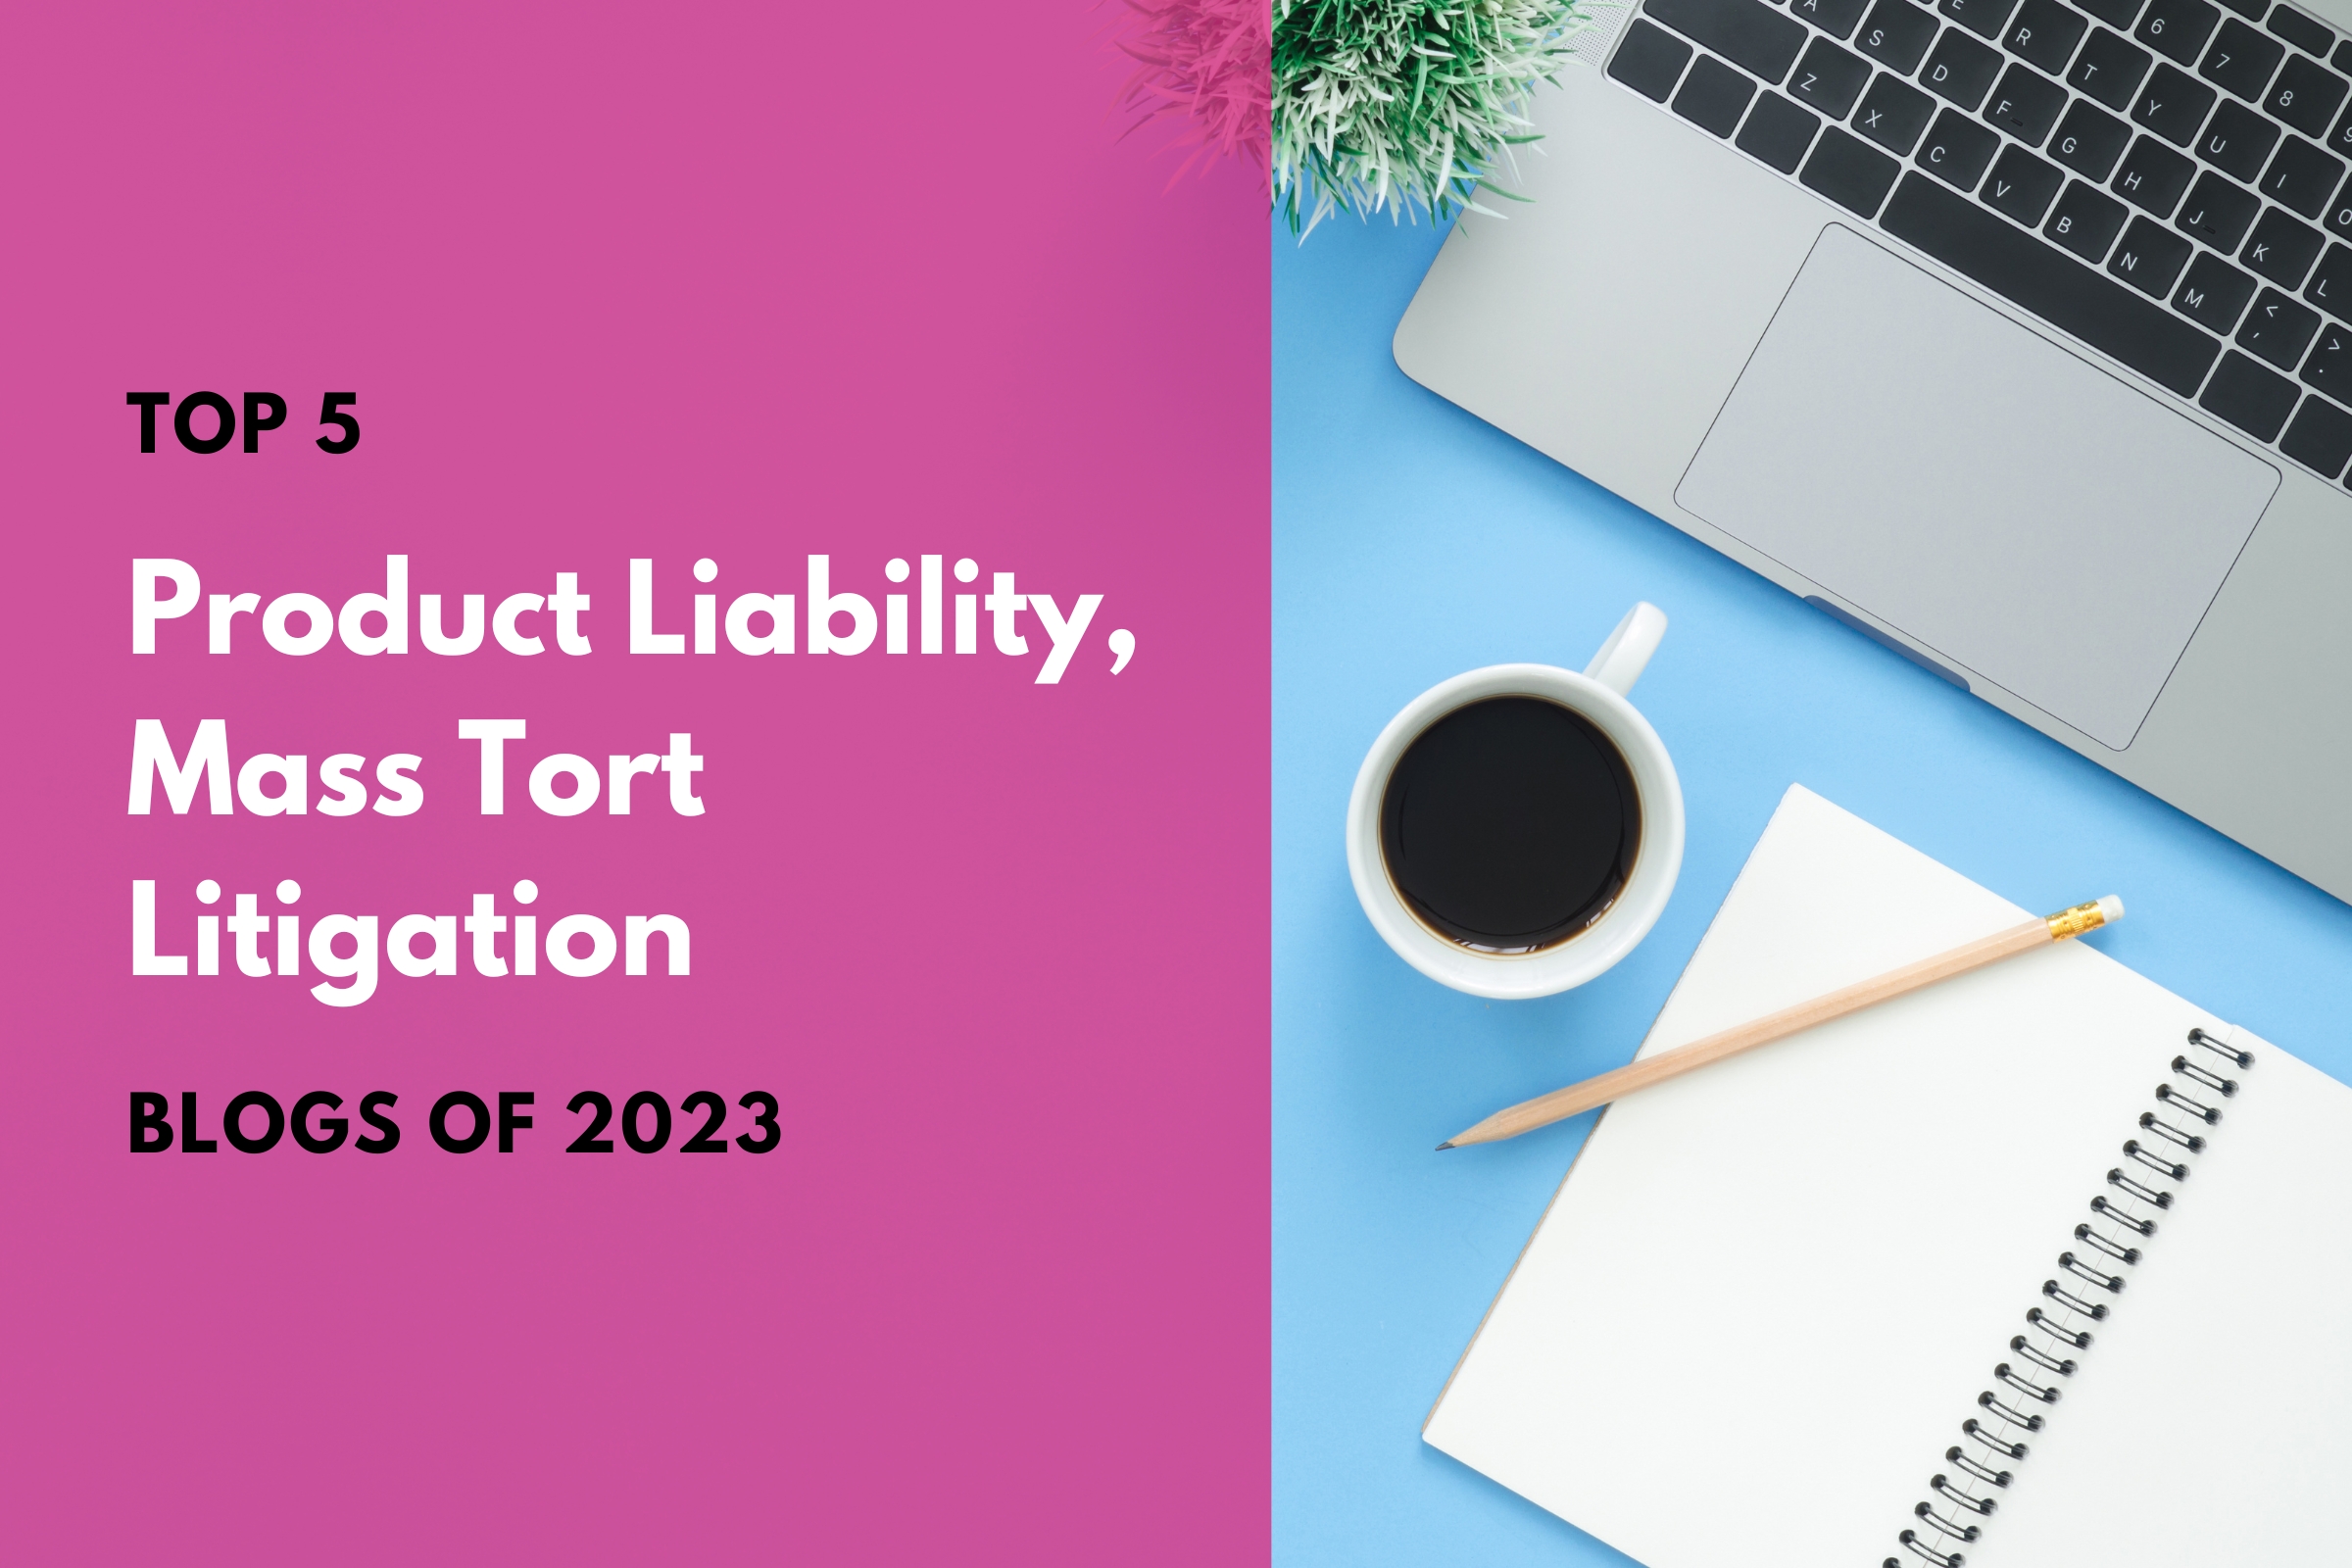 Top 5 Product Liability, Mass Tort Litigation Blogs of 2023